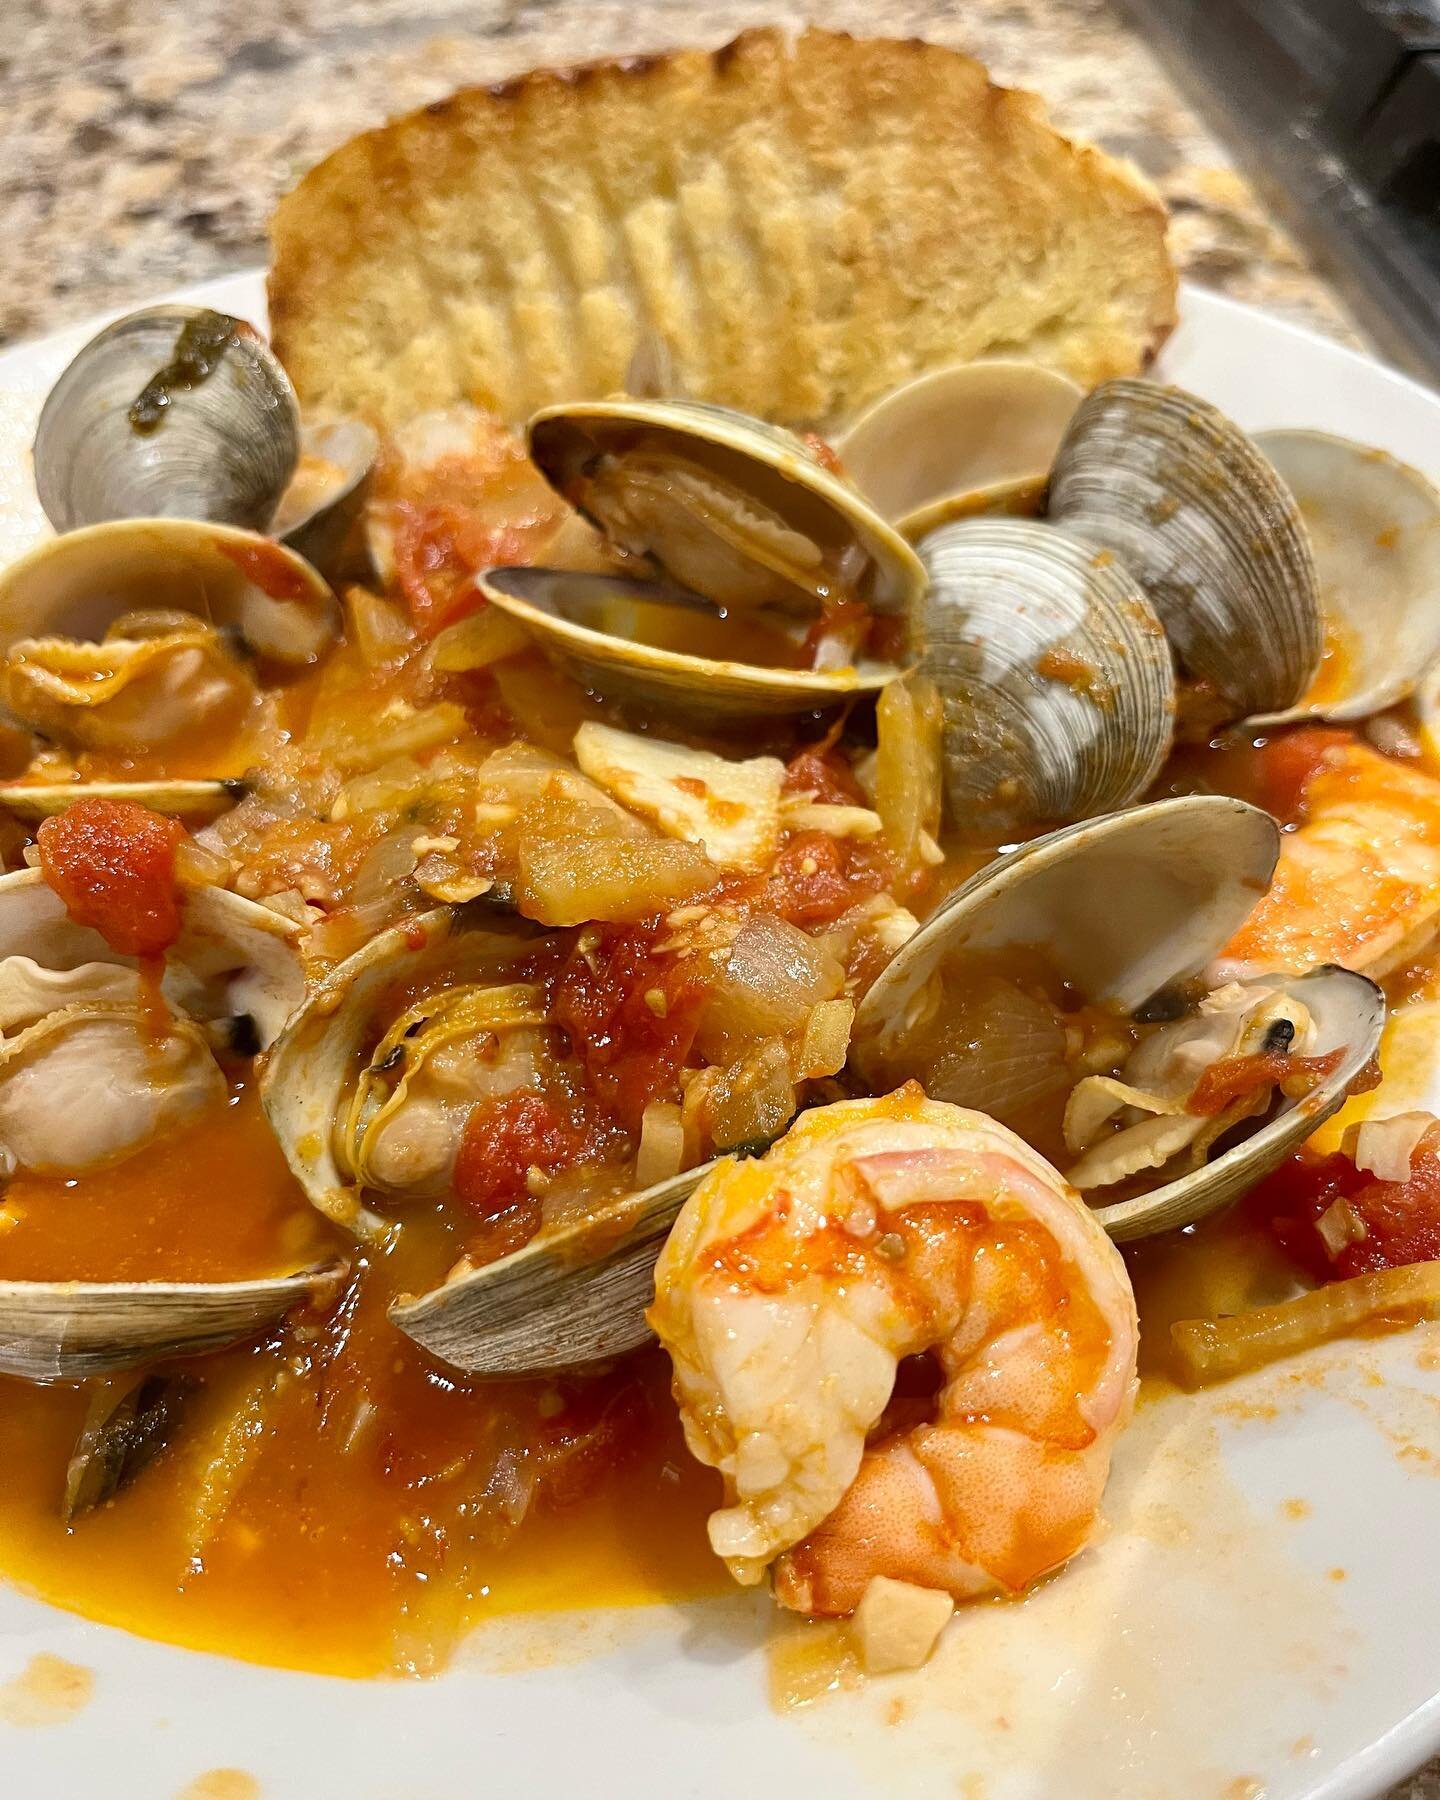 Cioppino in the house!  @beyer.tom #cookingathome. #cookingwithlove #cookingitalian